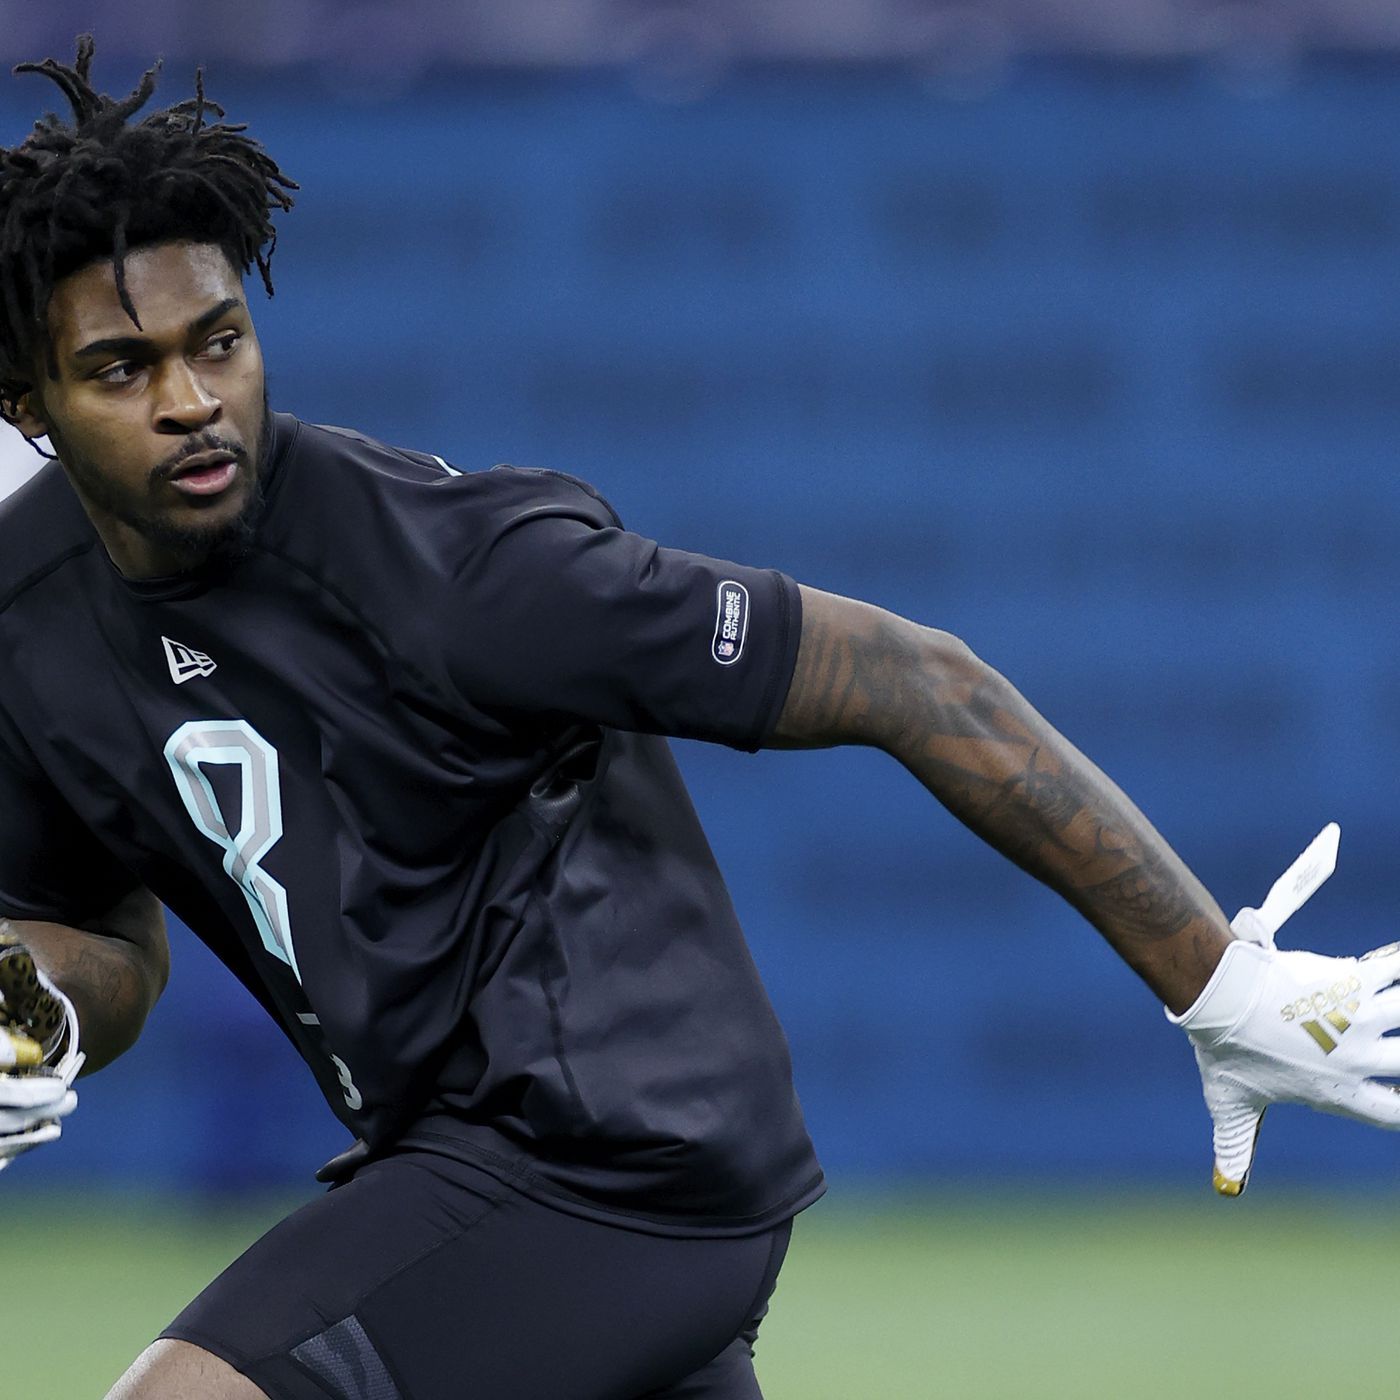 NFL Draft results 2020: The Dallas Cowboys select CB Trevon Diggs with the 51st pick The Boys